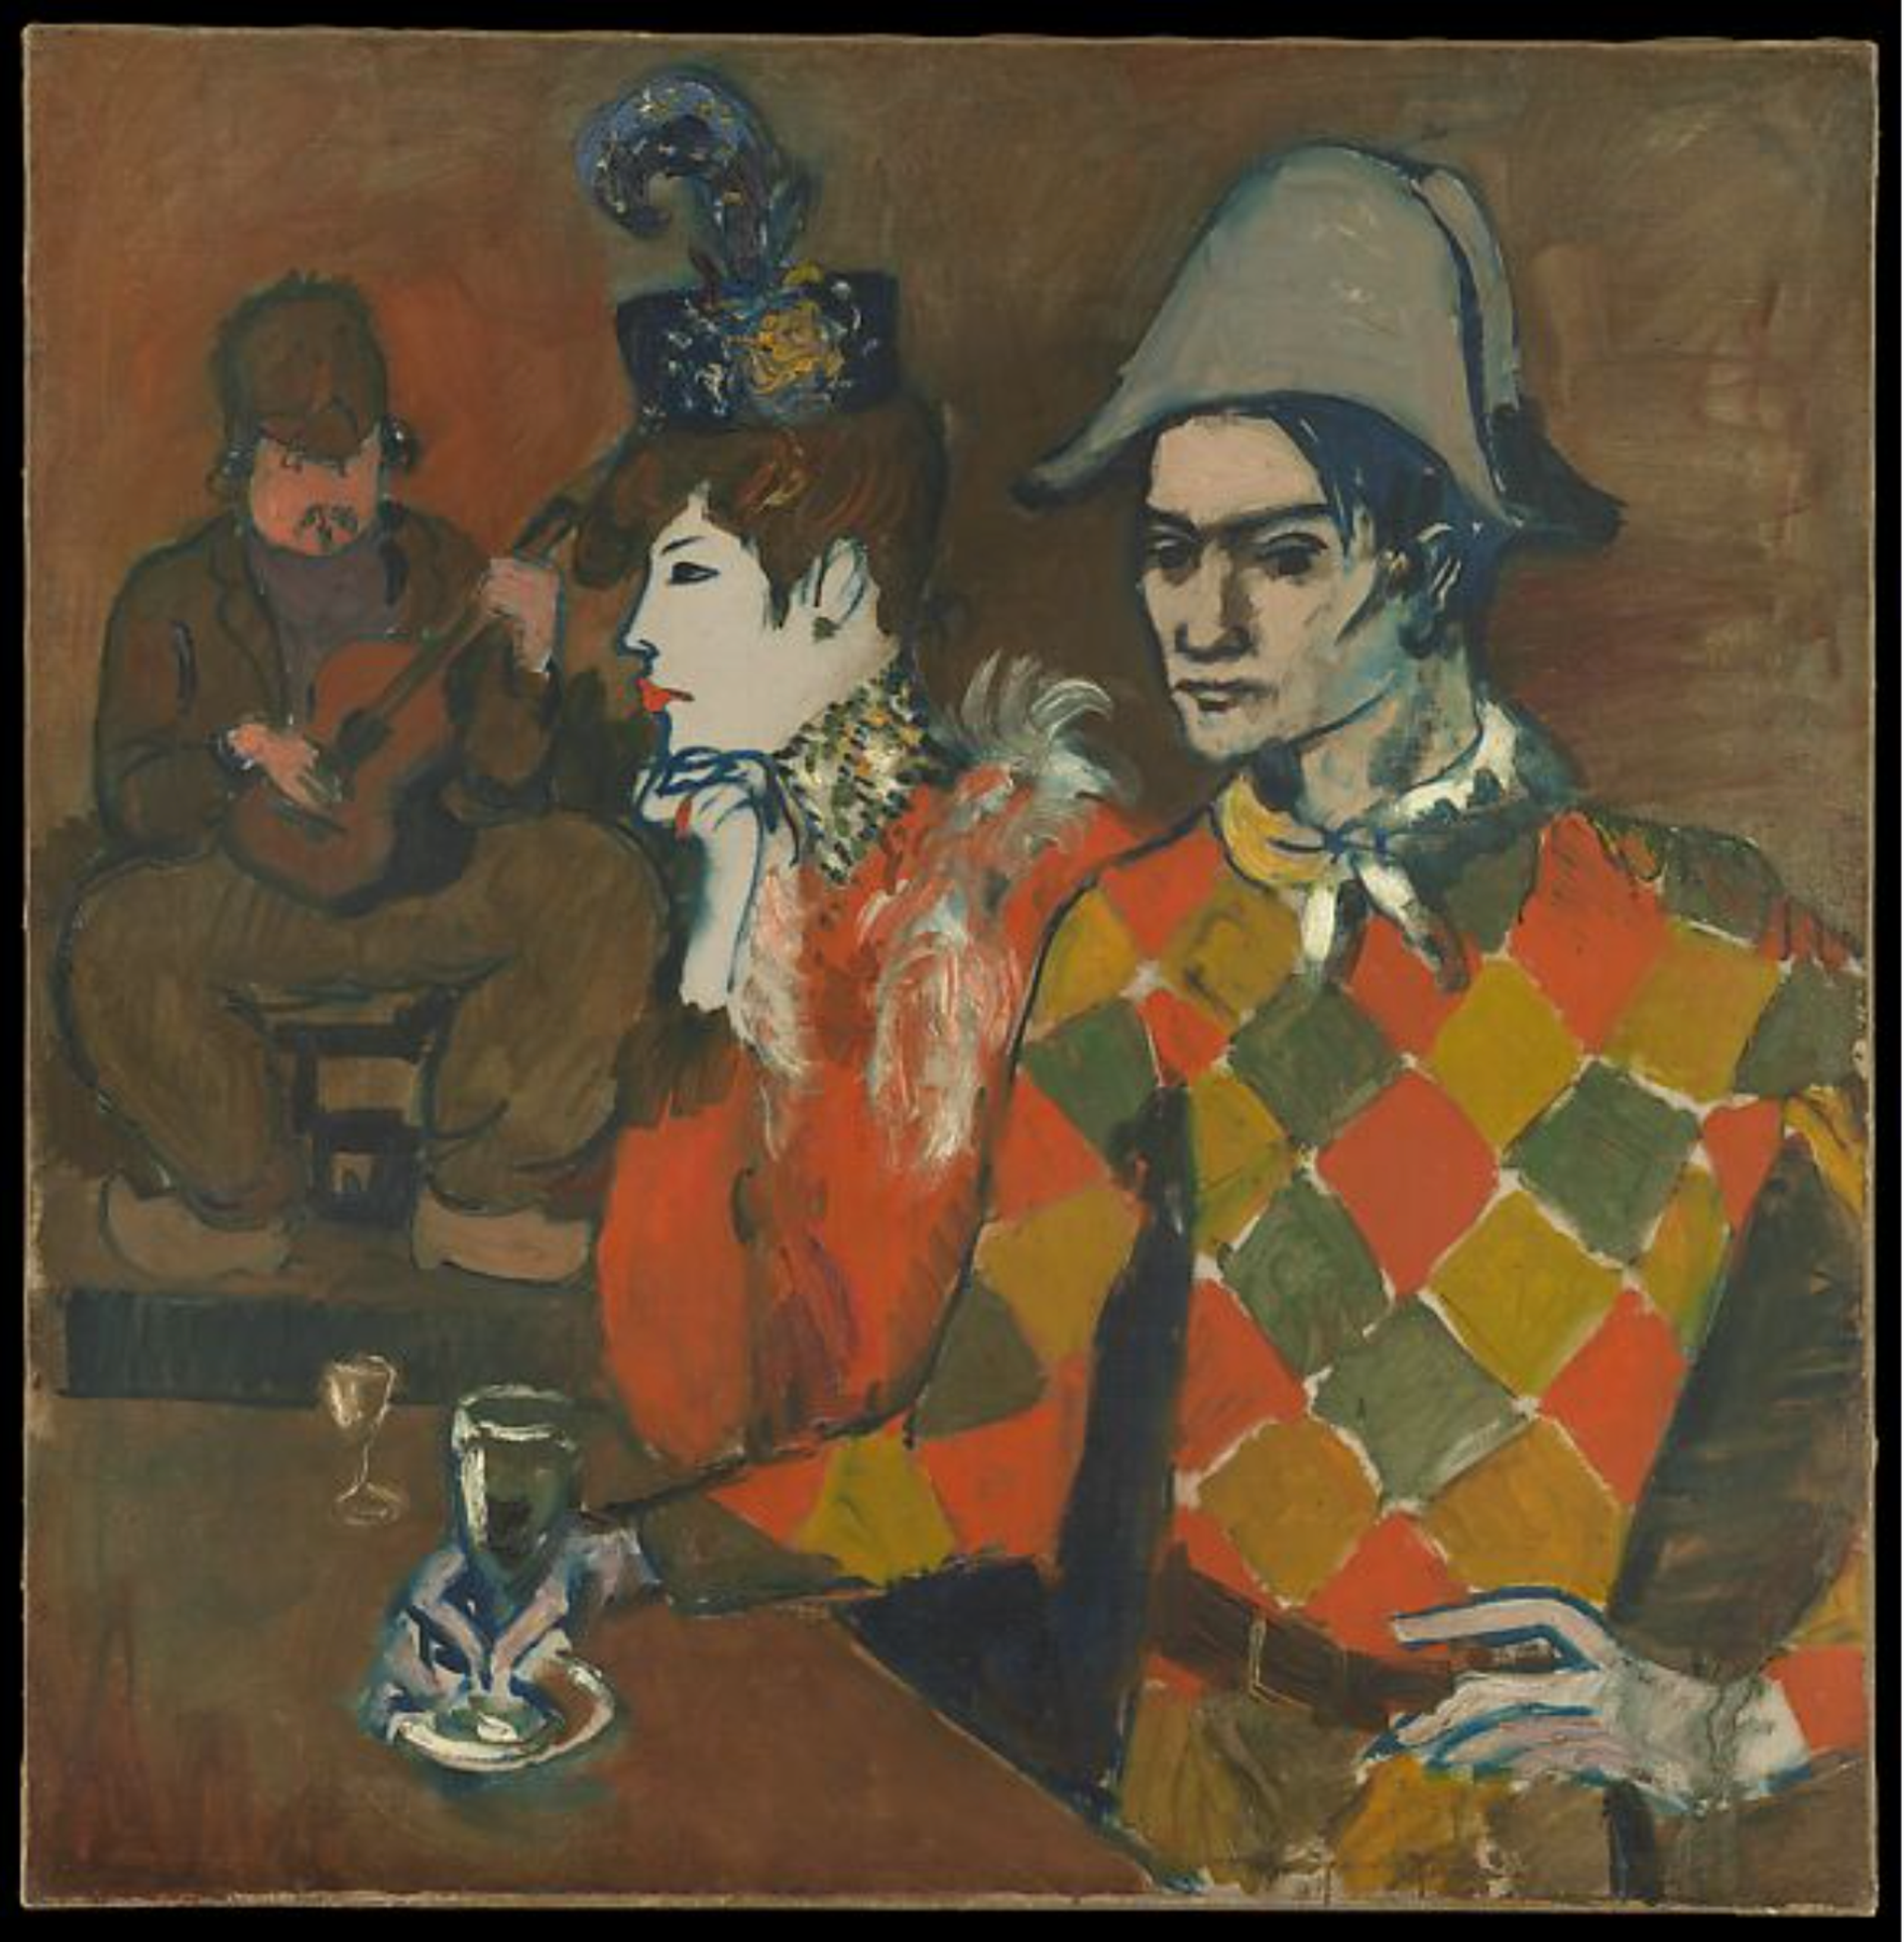 Painting by Picasso depicting himself as a Harlequin alongside his lover Germaine Pichot.